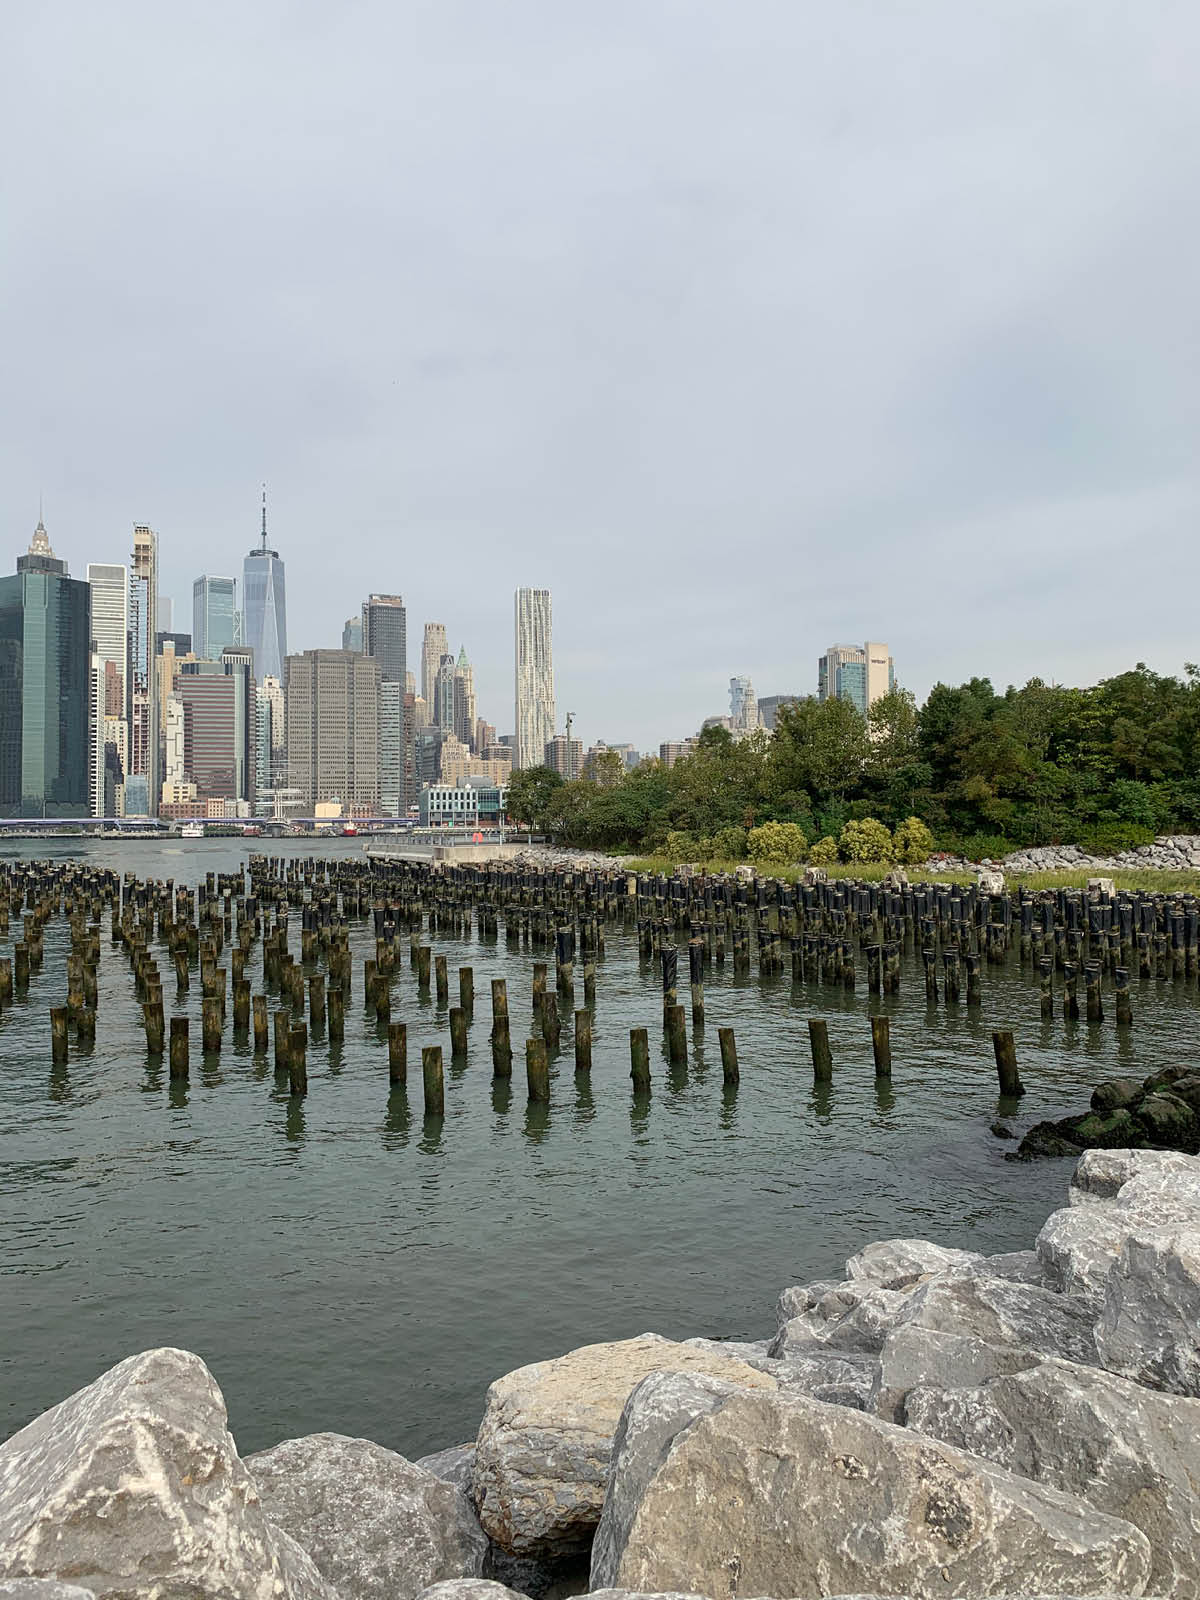 View of Pier 1 Salt Marsh and Pile Filed on a cloudy day. Lower Manhattan is seen in the background.